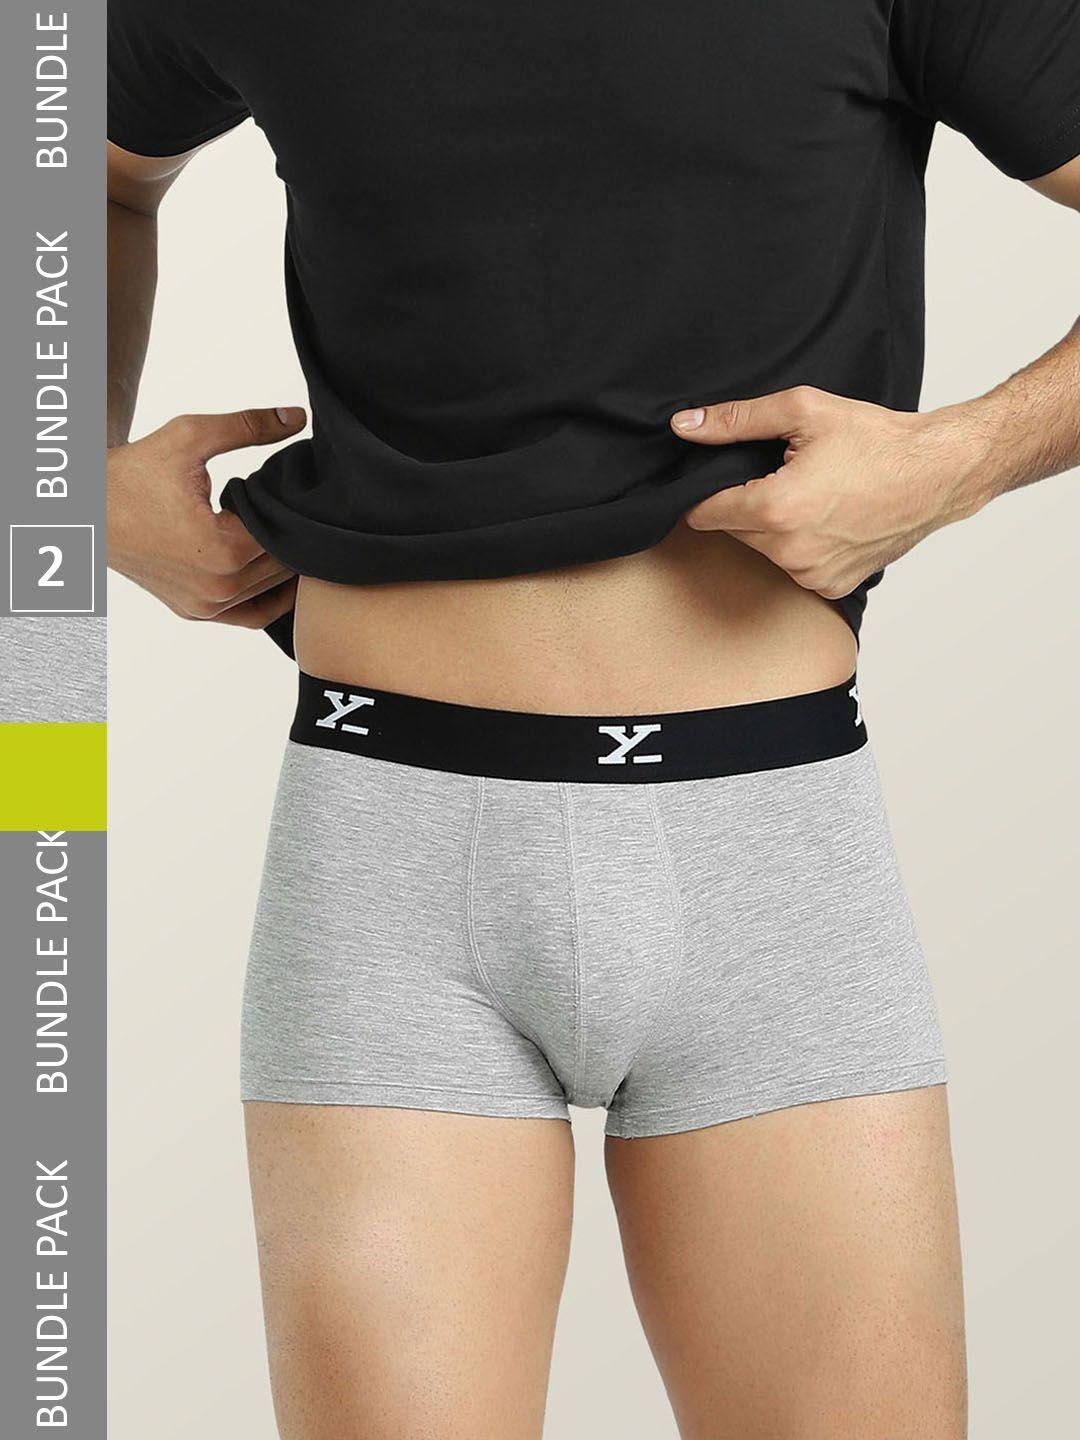 xyxx men pack of 2 mid-rise sweat wickingtrunks